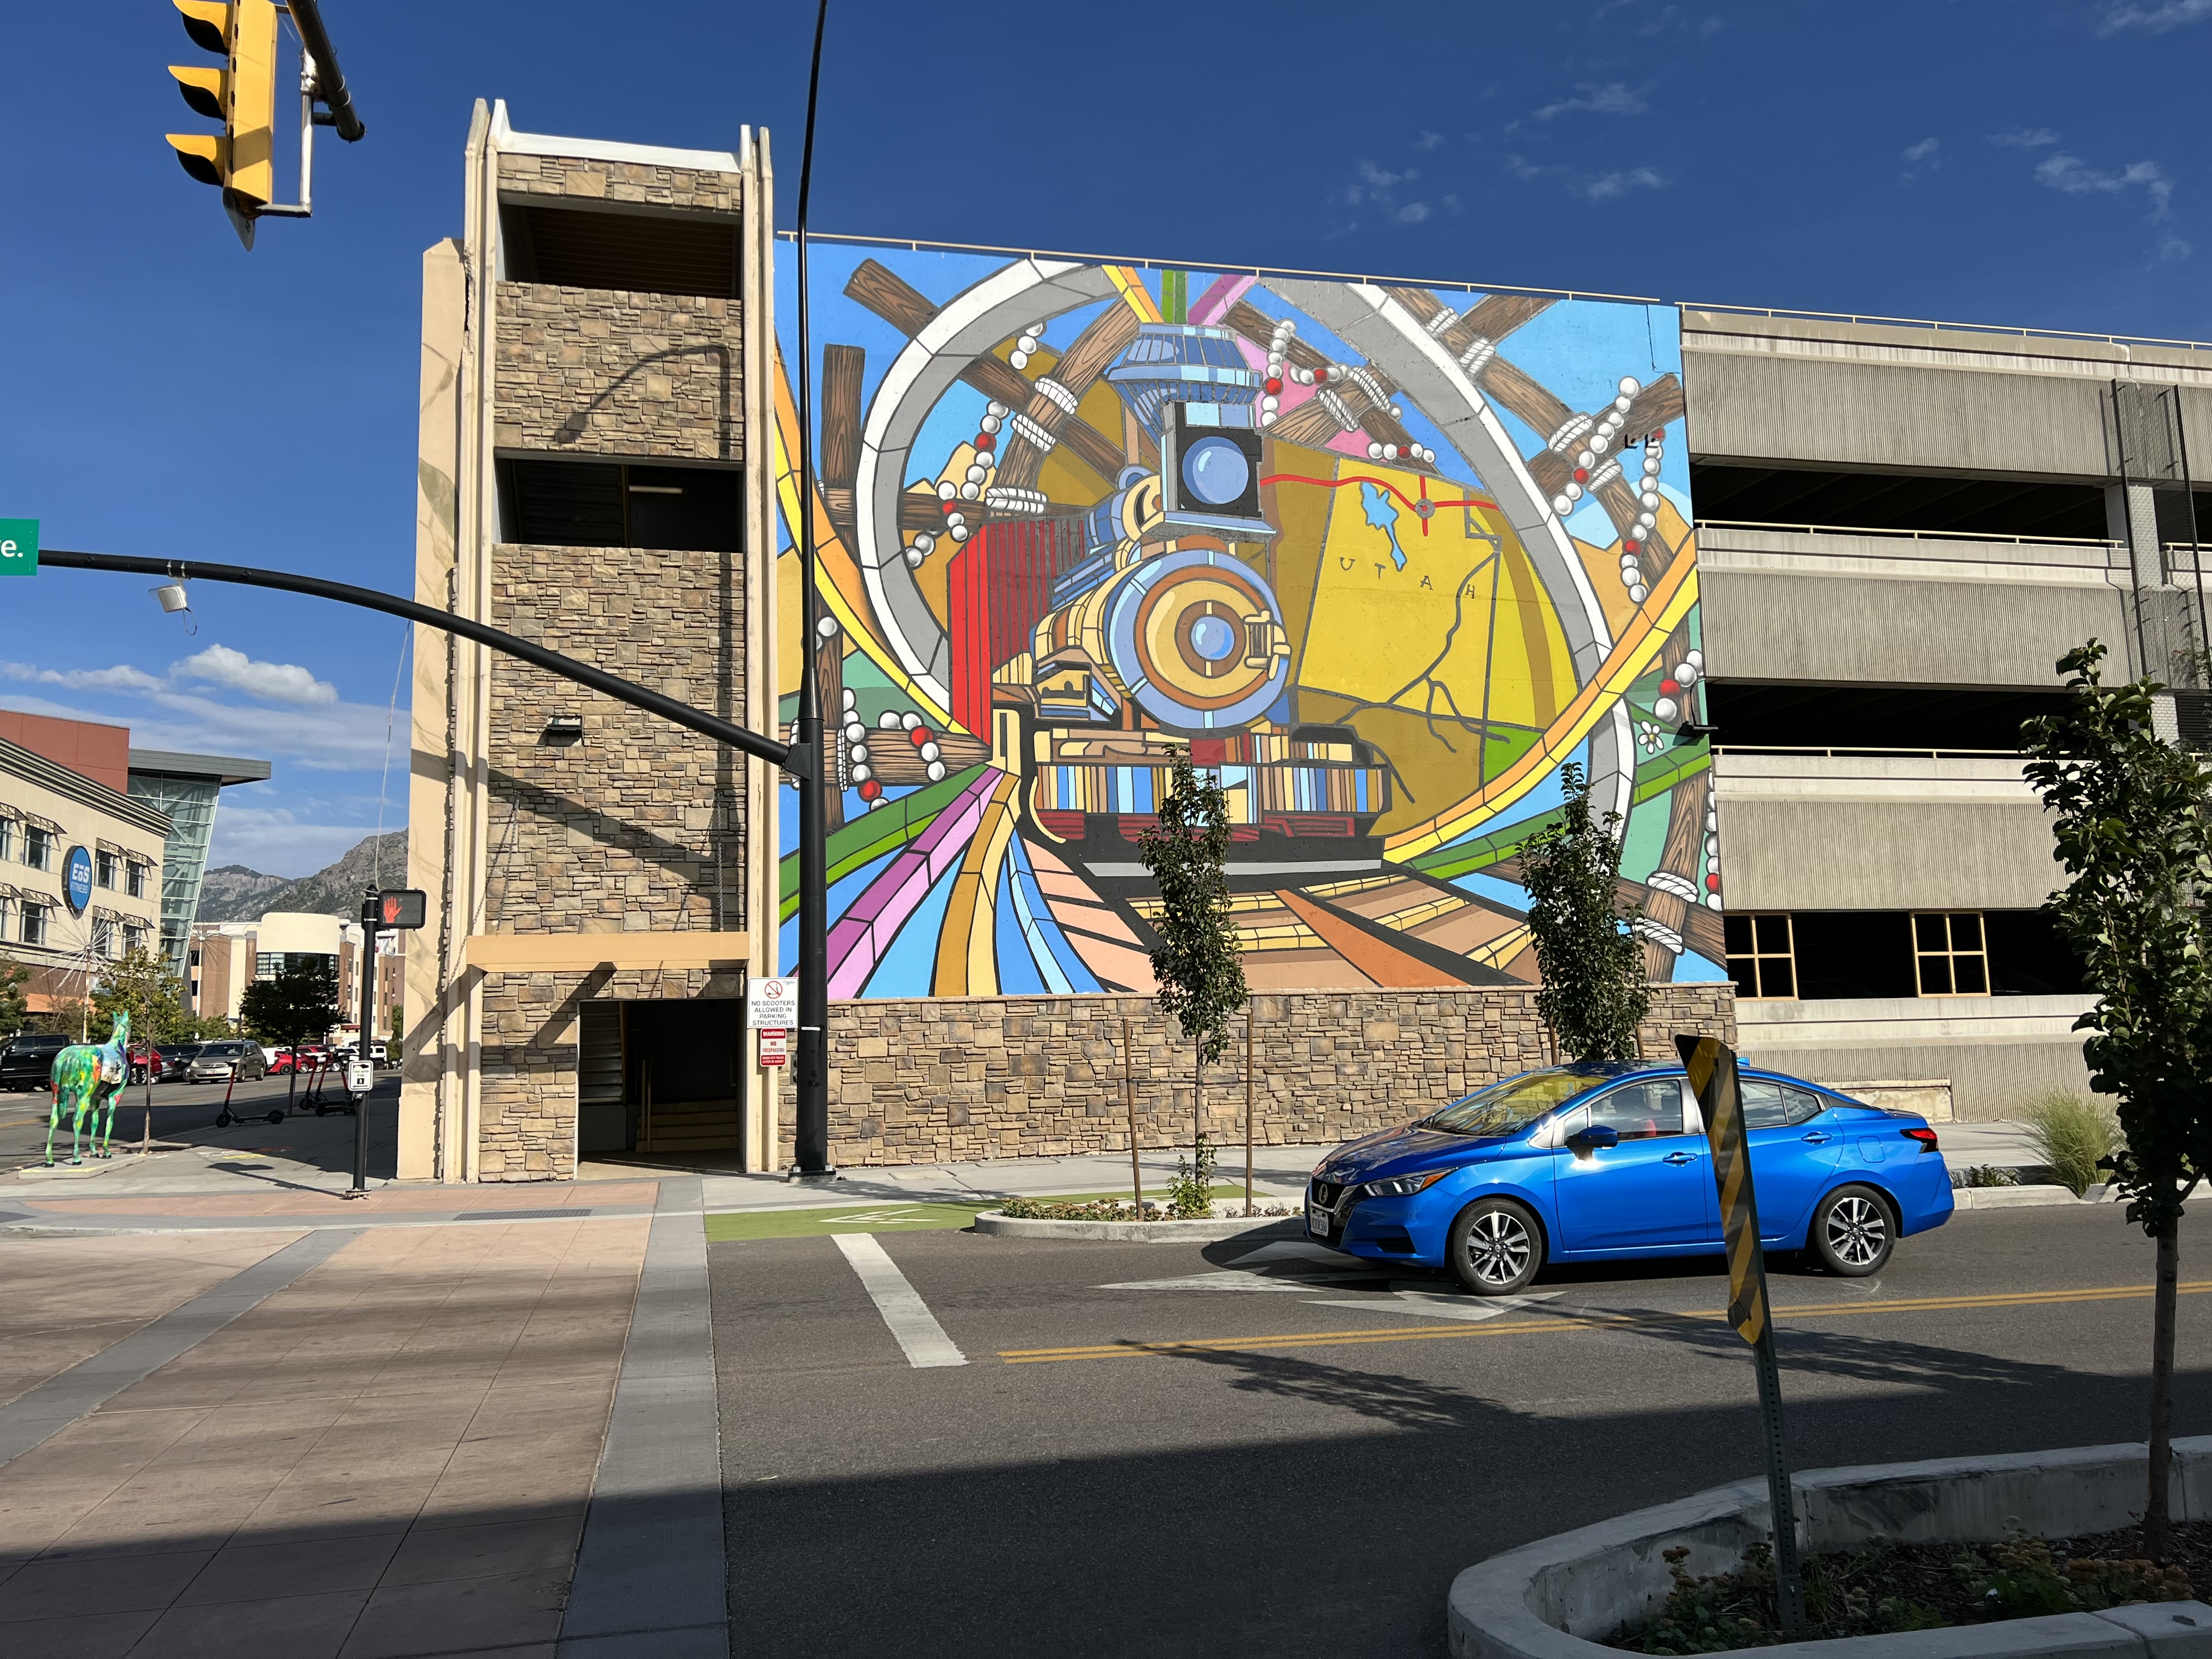 picture showing mural and car in the standard photographic style